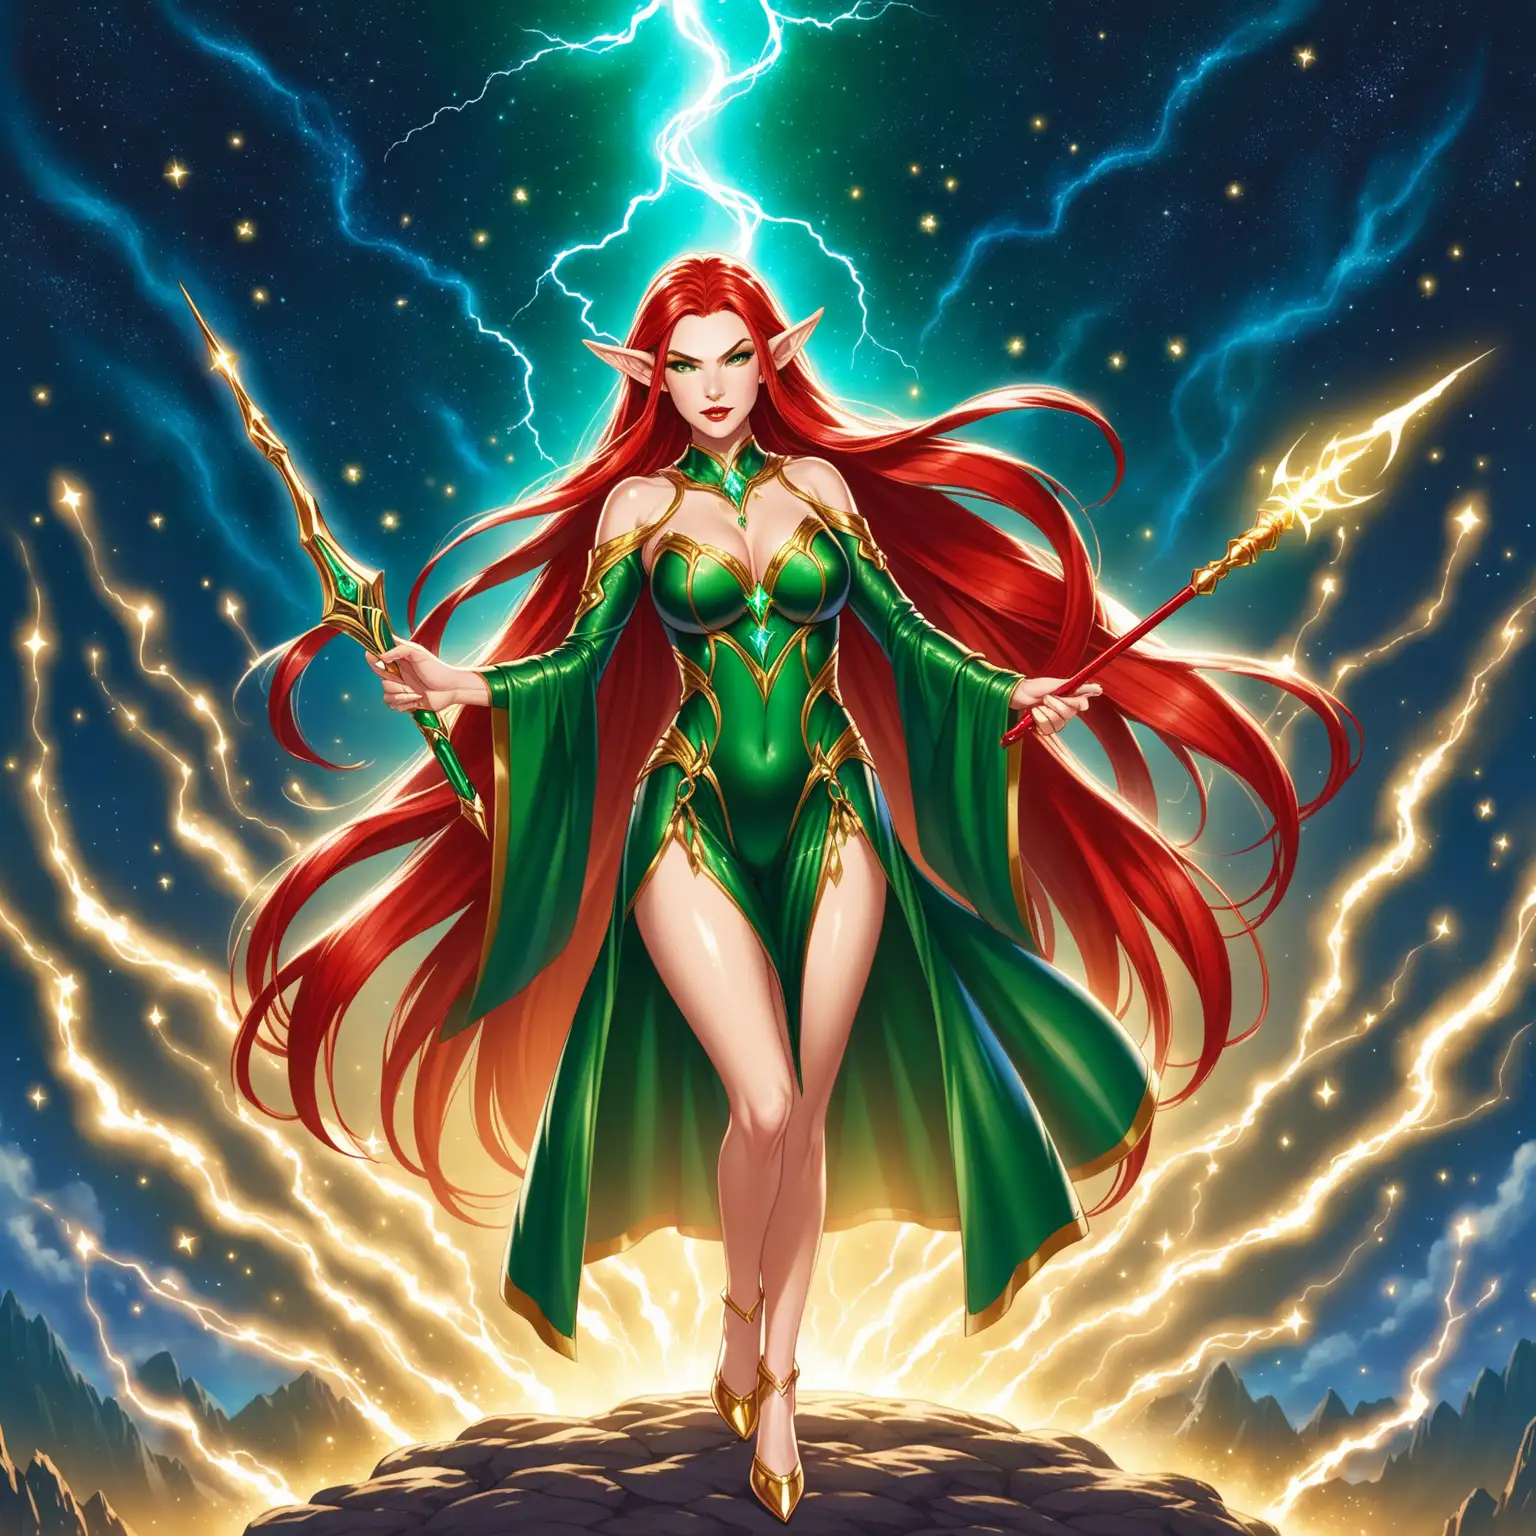 1 elf woman. She is the goddess of the elves and she is a warrior. She is extremely beautiful and mature. She is 60 years old. She has very long straight red hair. She is wearing makeup and shiny red lipstick. She is elegant and regal. She has medium tits and is physically fit. She is wearing a hunter green long latex dress and high heels. She is wearing gold Jewelry with emeralds. She has an enraged expression and is casting lightning magic with a simple red wand. She does not look young. She is in the elven heaven with stars and magic in the background. She does not look young and looks mature.